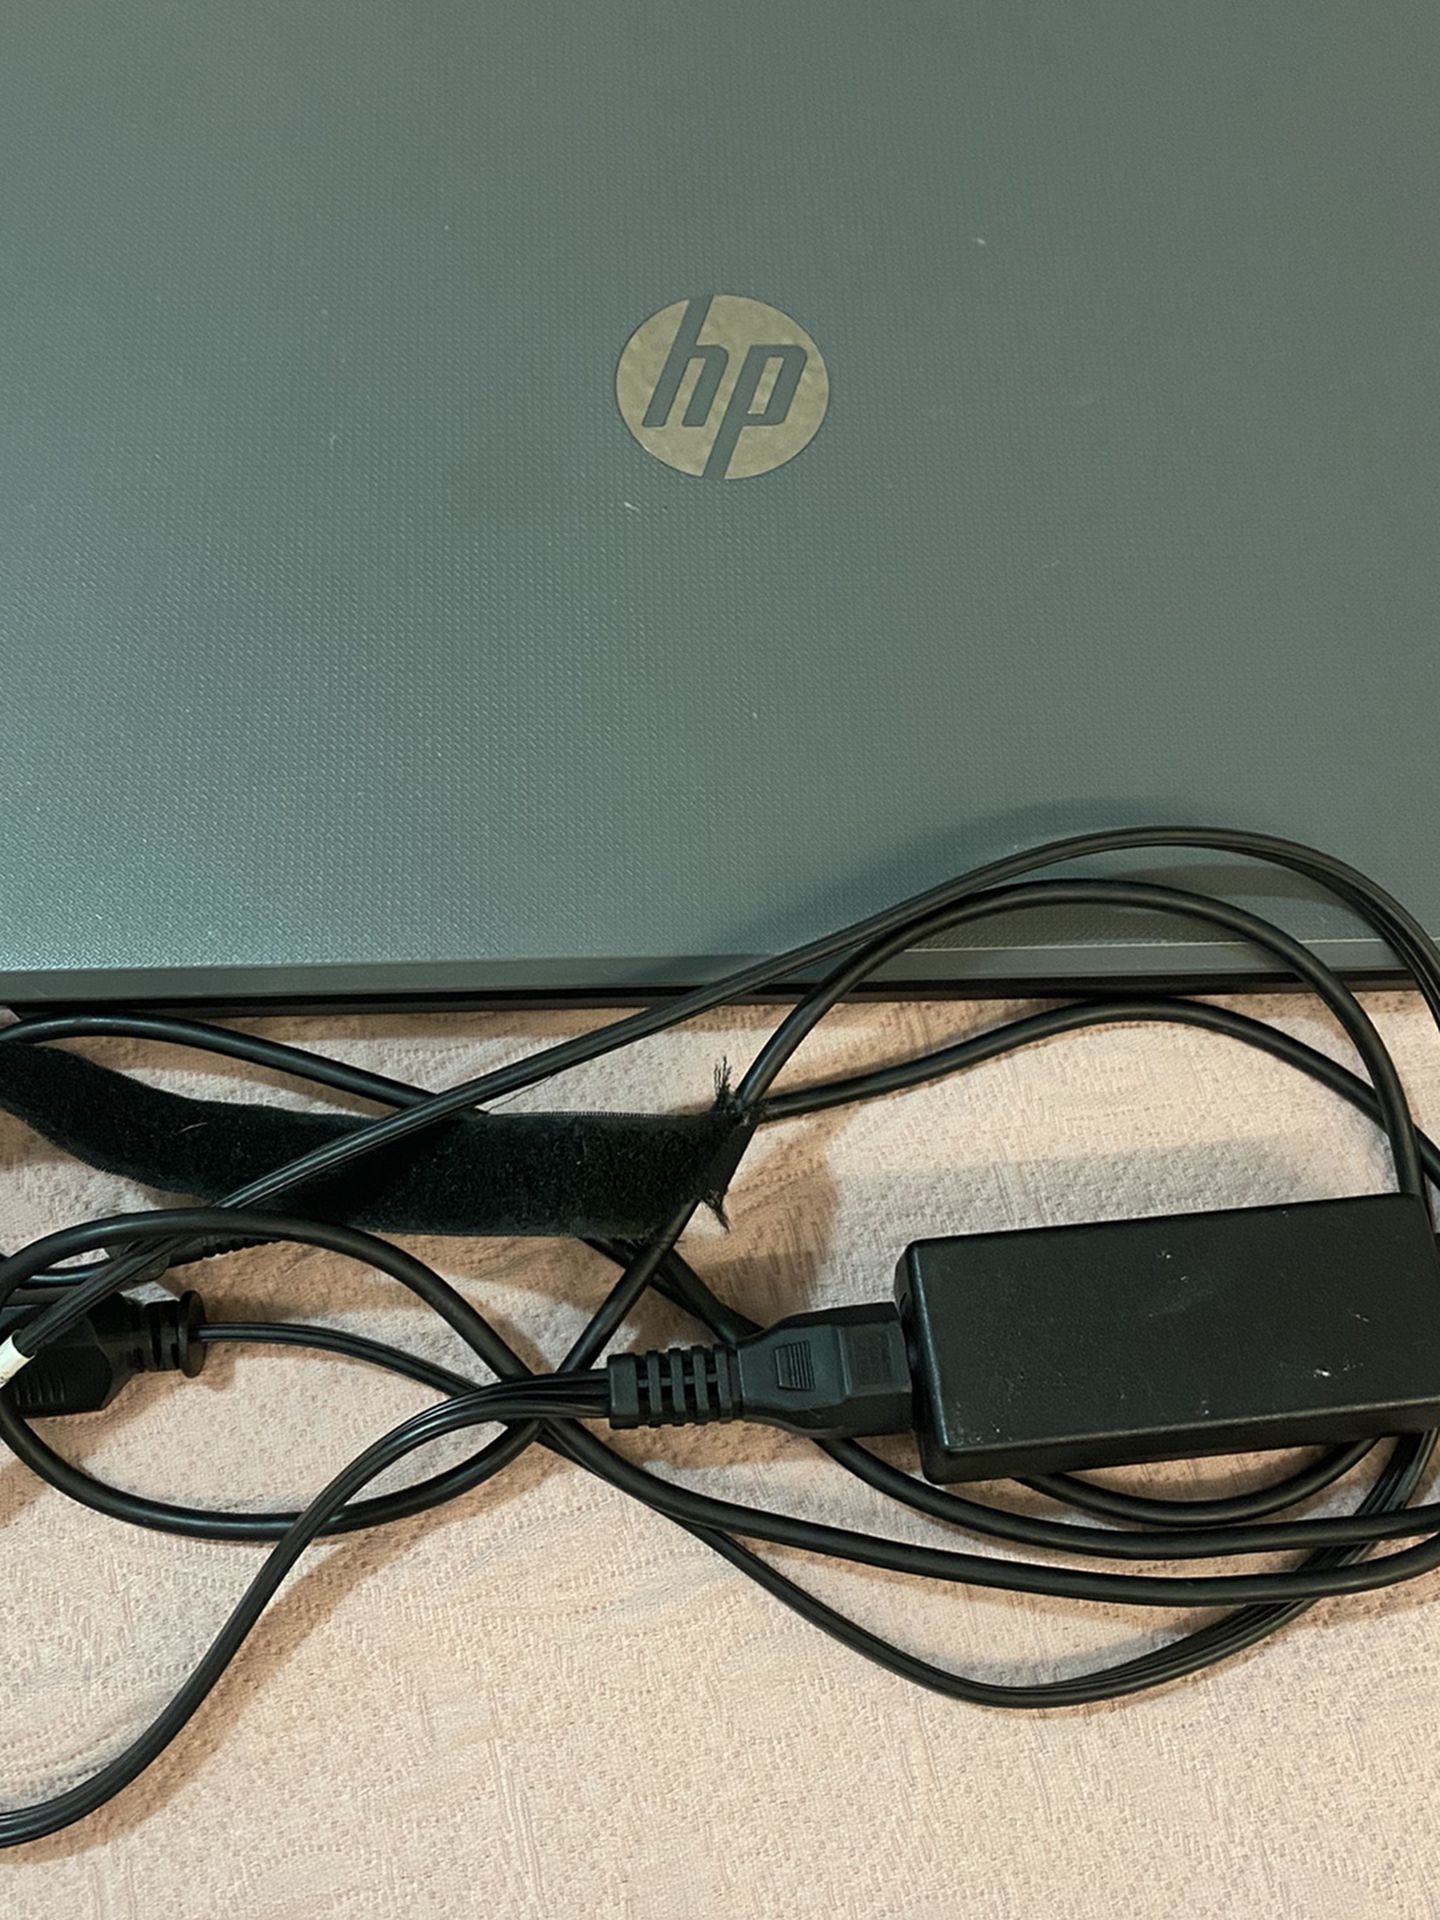 Hp Laptop Touchscreen 19.5 Inch With Charger